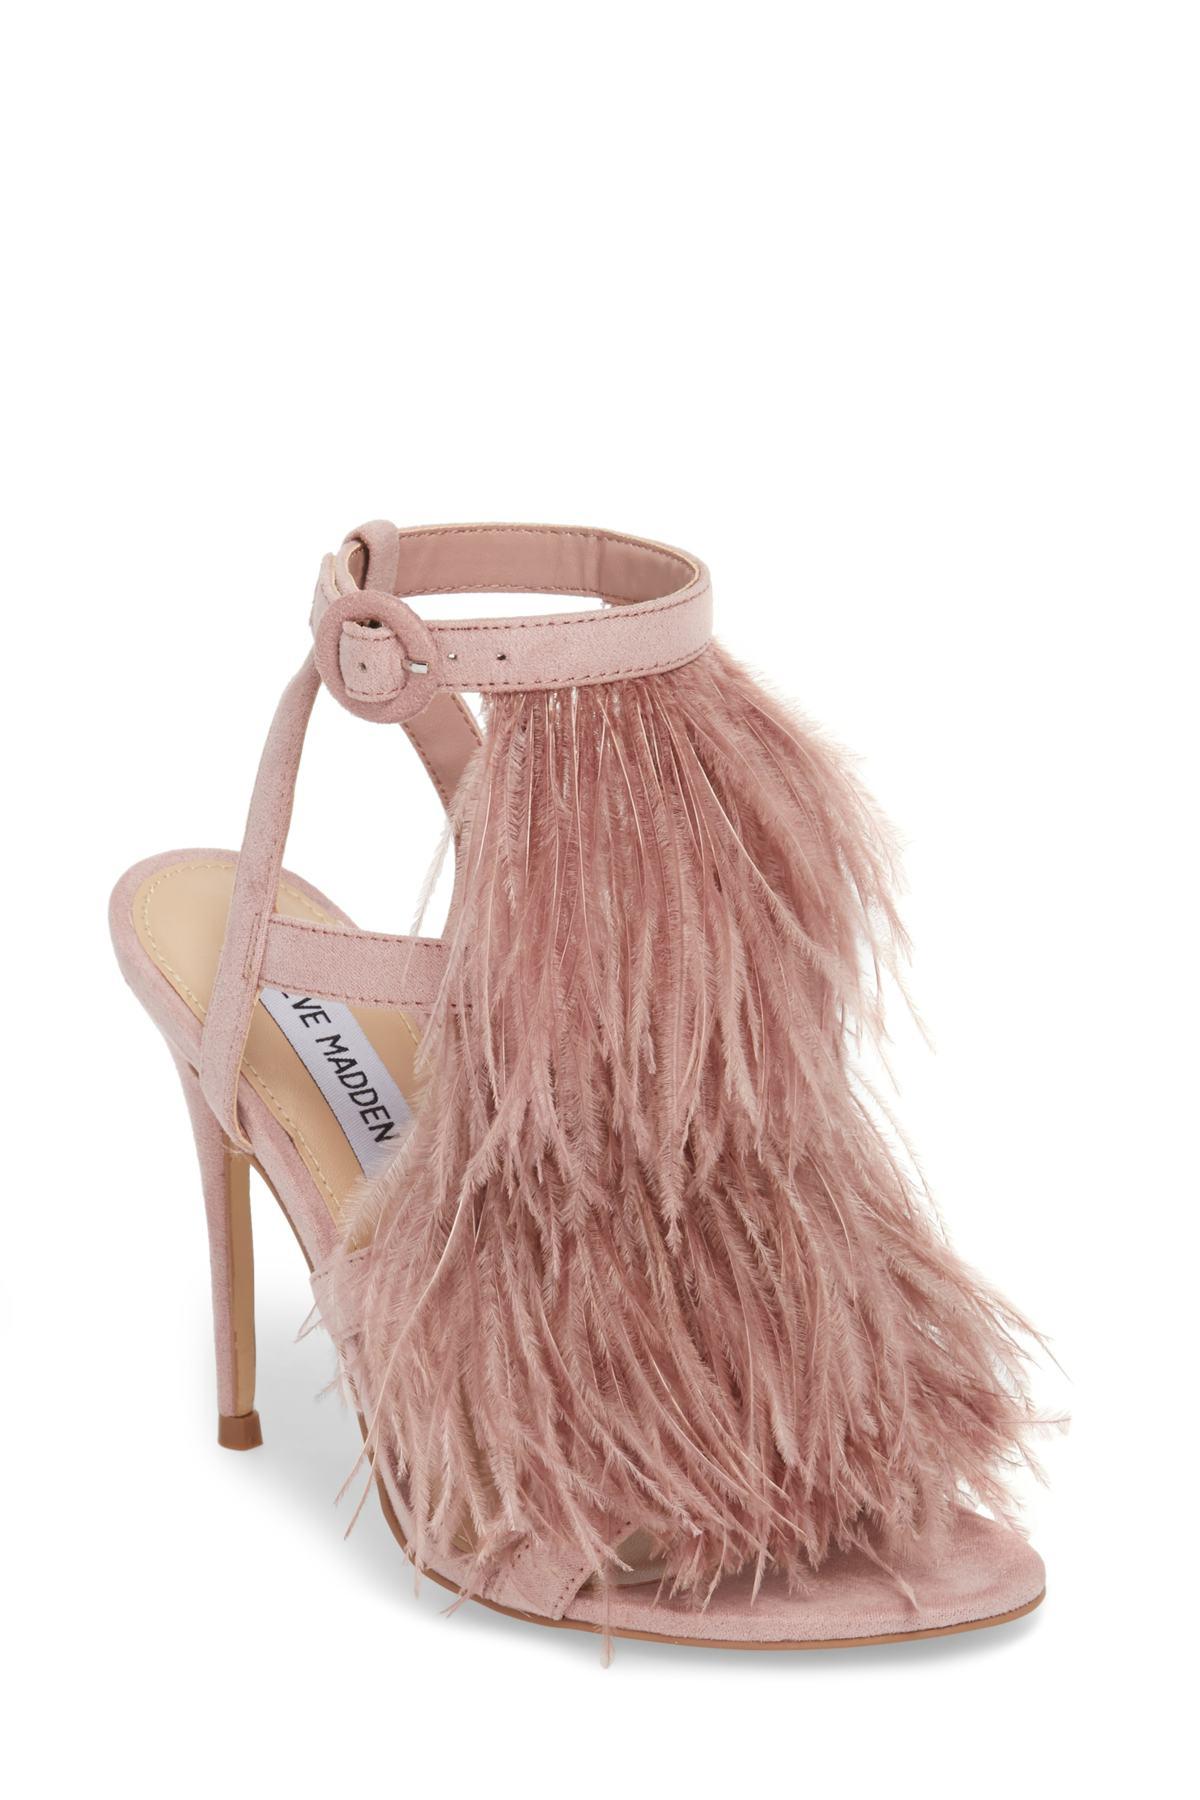 Steve Madden Fefe Feather Sandal in Pink | Lyst